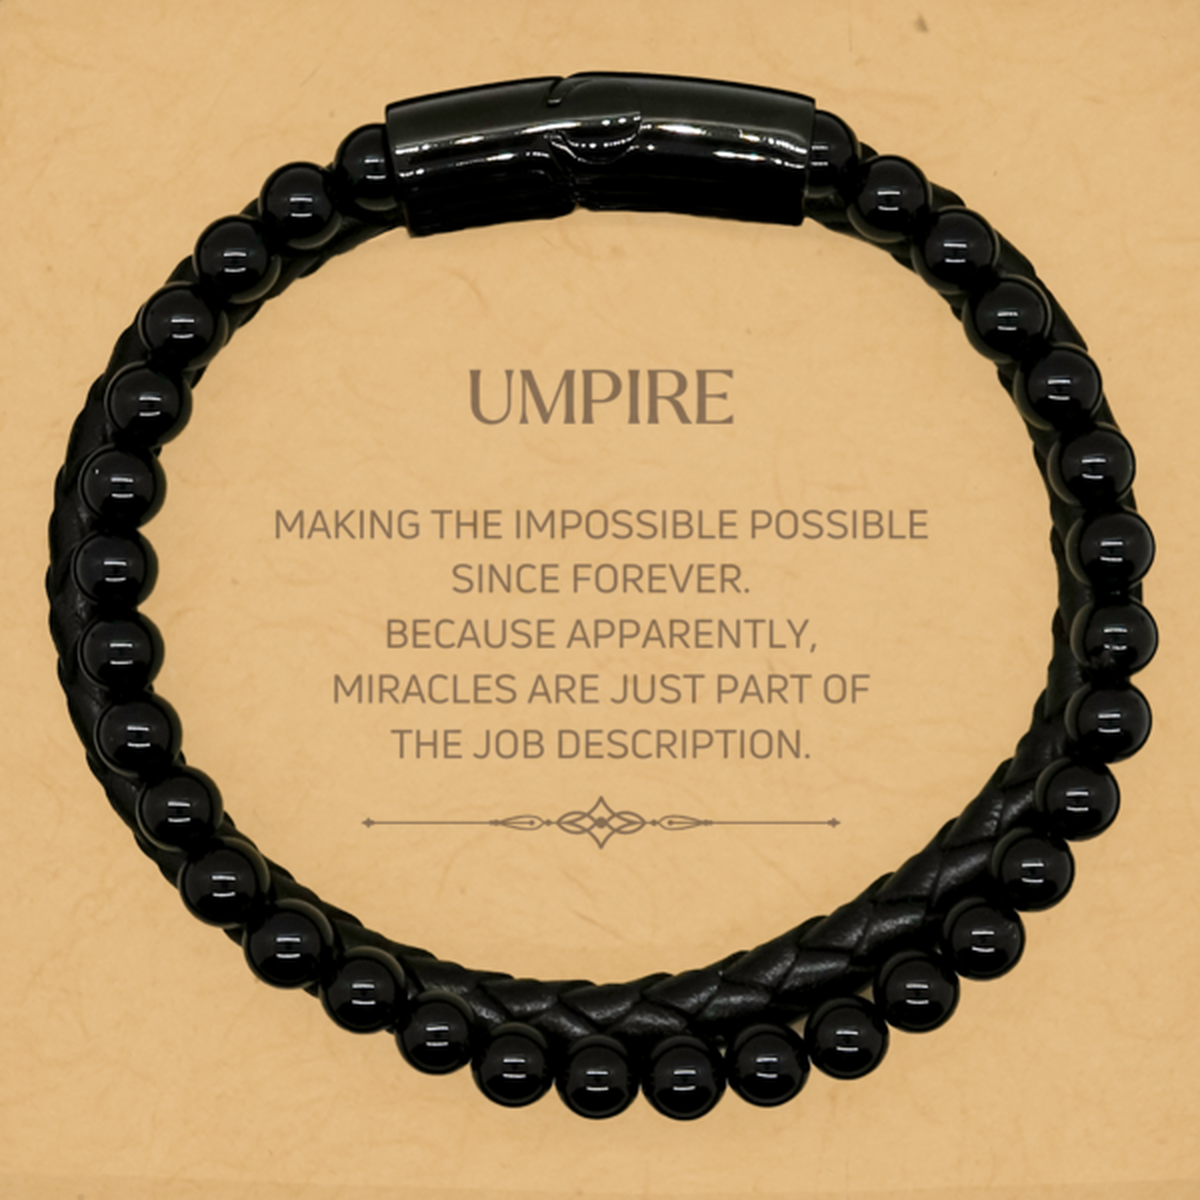 Funny Umpire Gifts, Miracles are just part of the job description, Inspirational Birthday Stone Leather Bracelets For Umpire, Men, Women, Coworkers, Friends, Boss